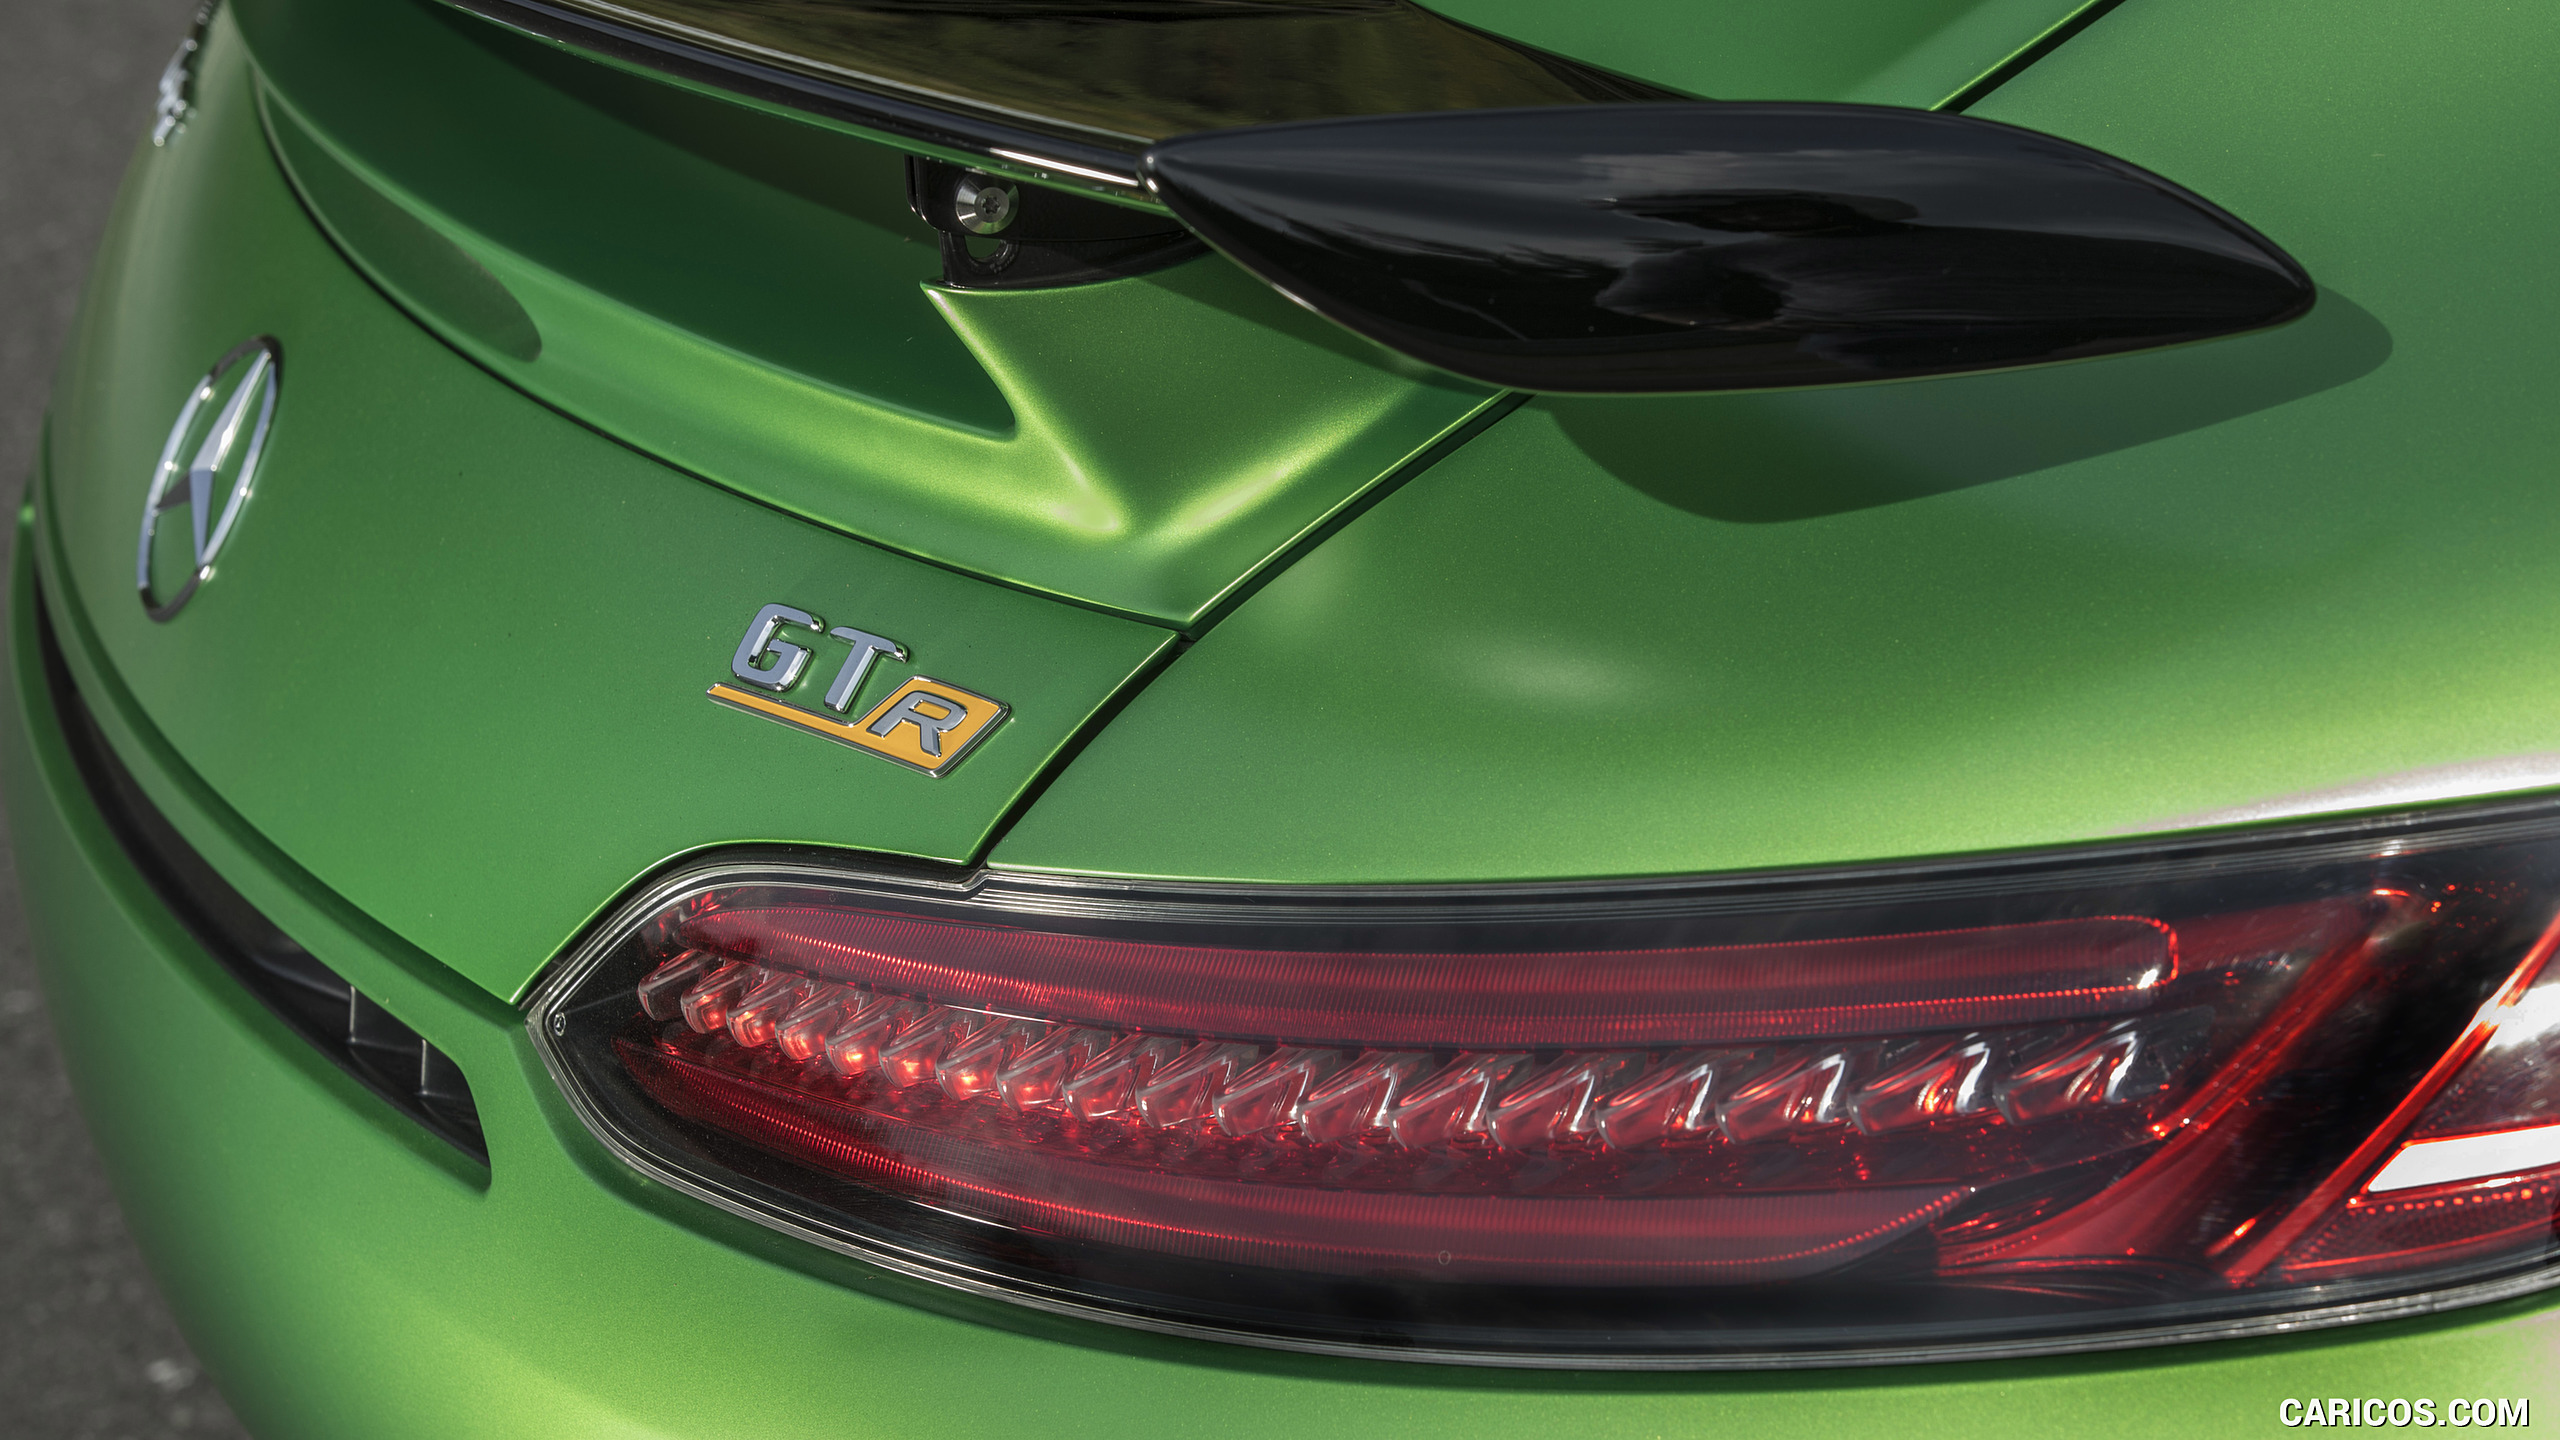 2017 Mercedes-AMG GT R Coupe - Tail Light, #181 of 182